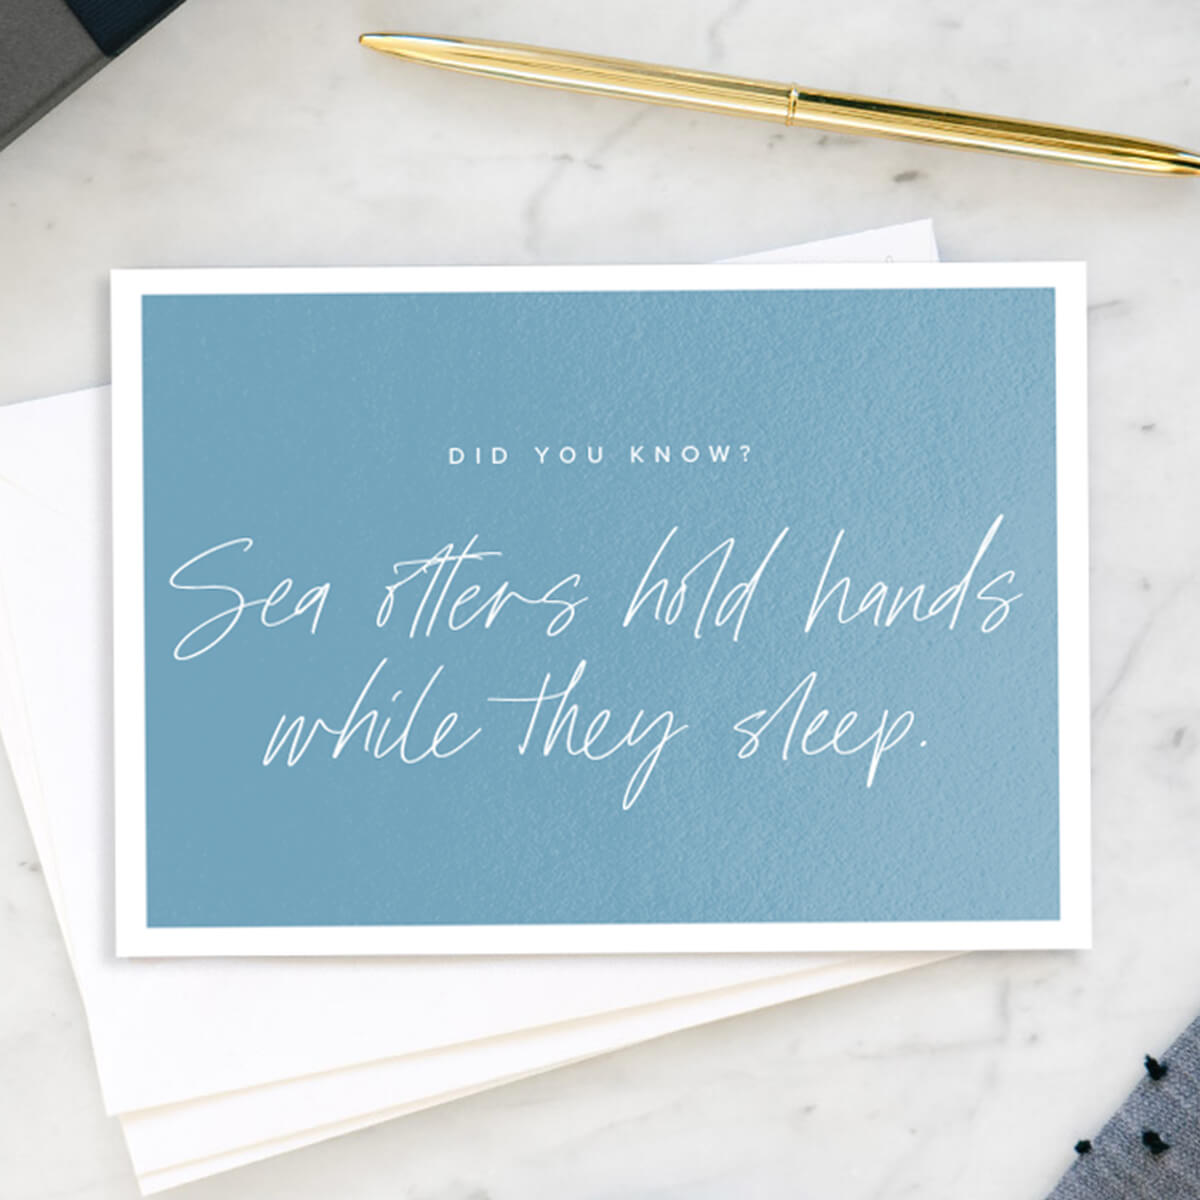 DIY postcard with the words sea otters hold hands while they sleep